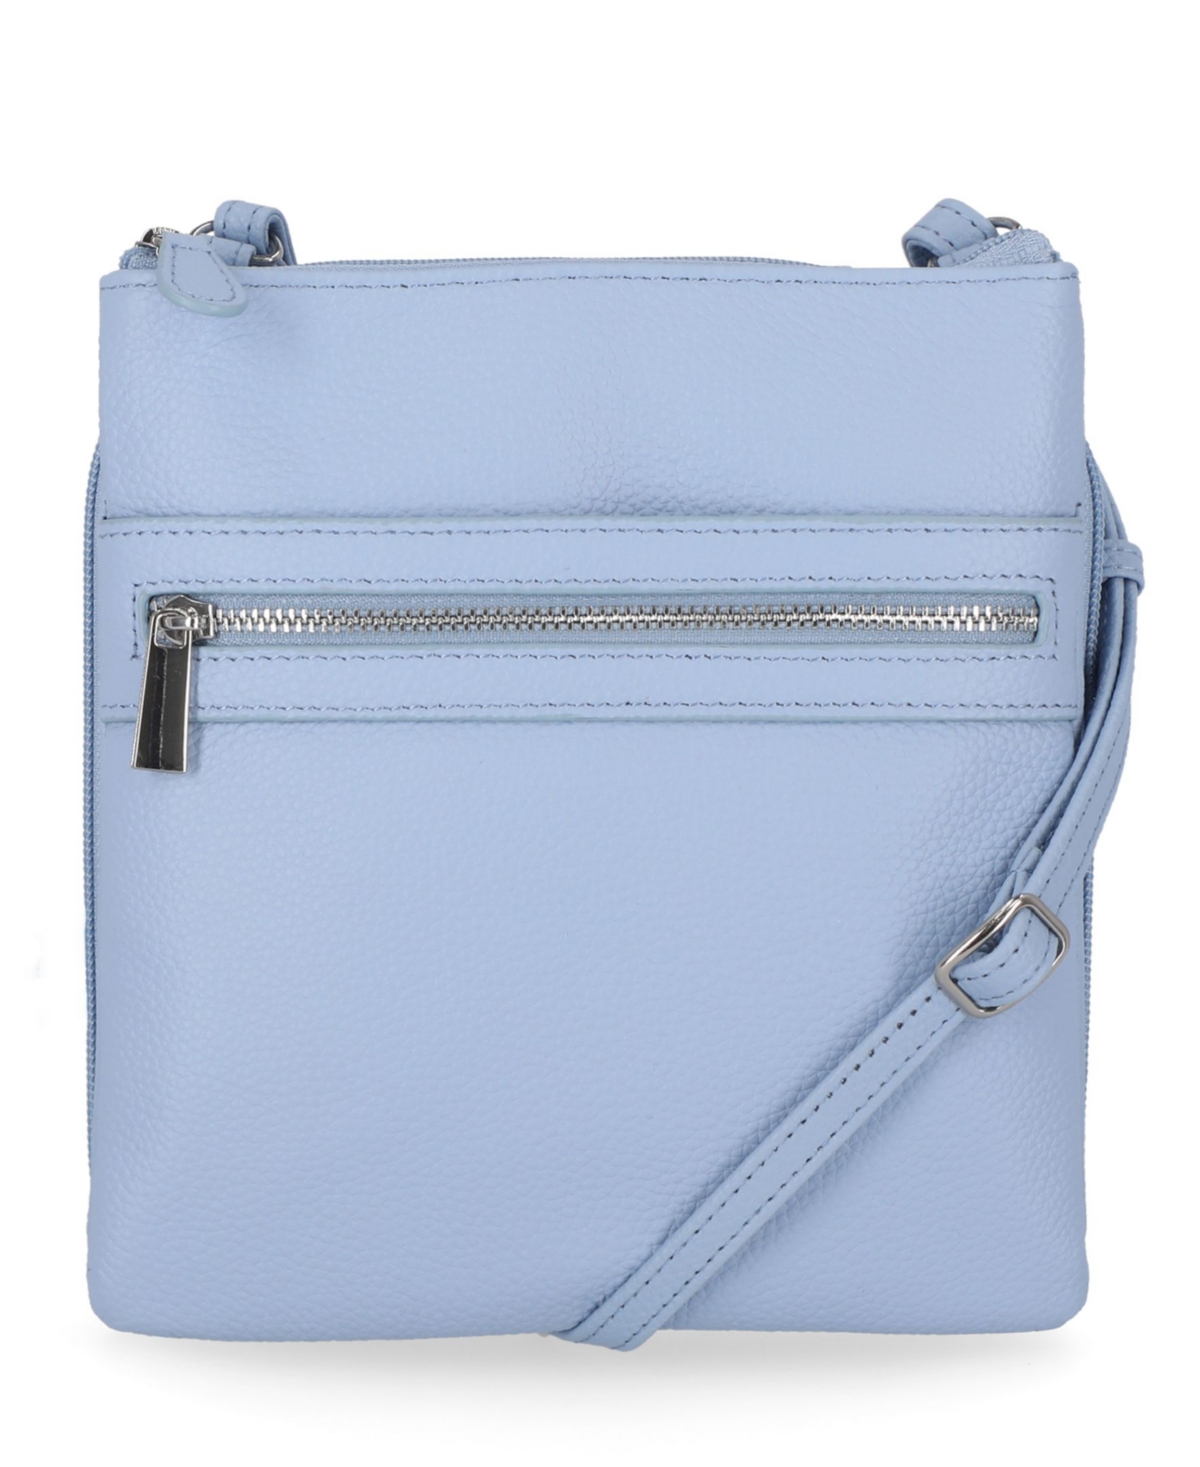 Triple-Zip Pebble Leather Dasher Crossbody, Created for Macy's - Rose